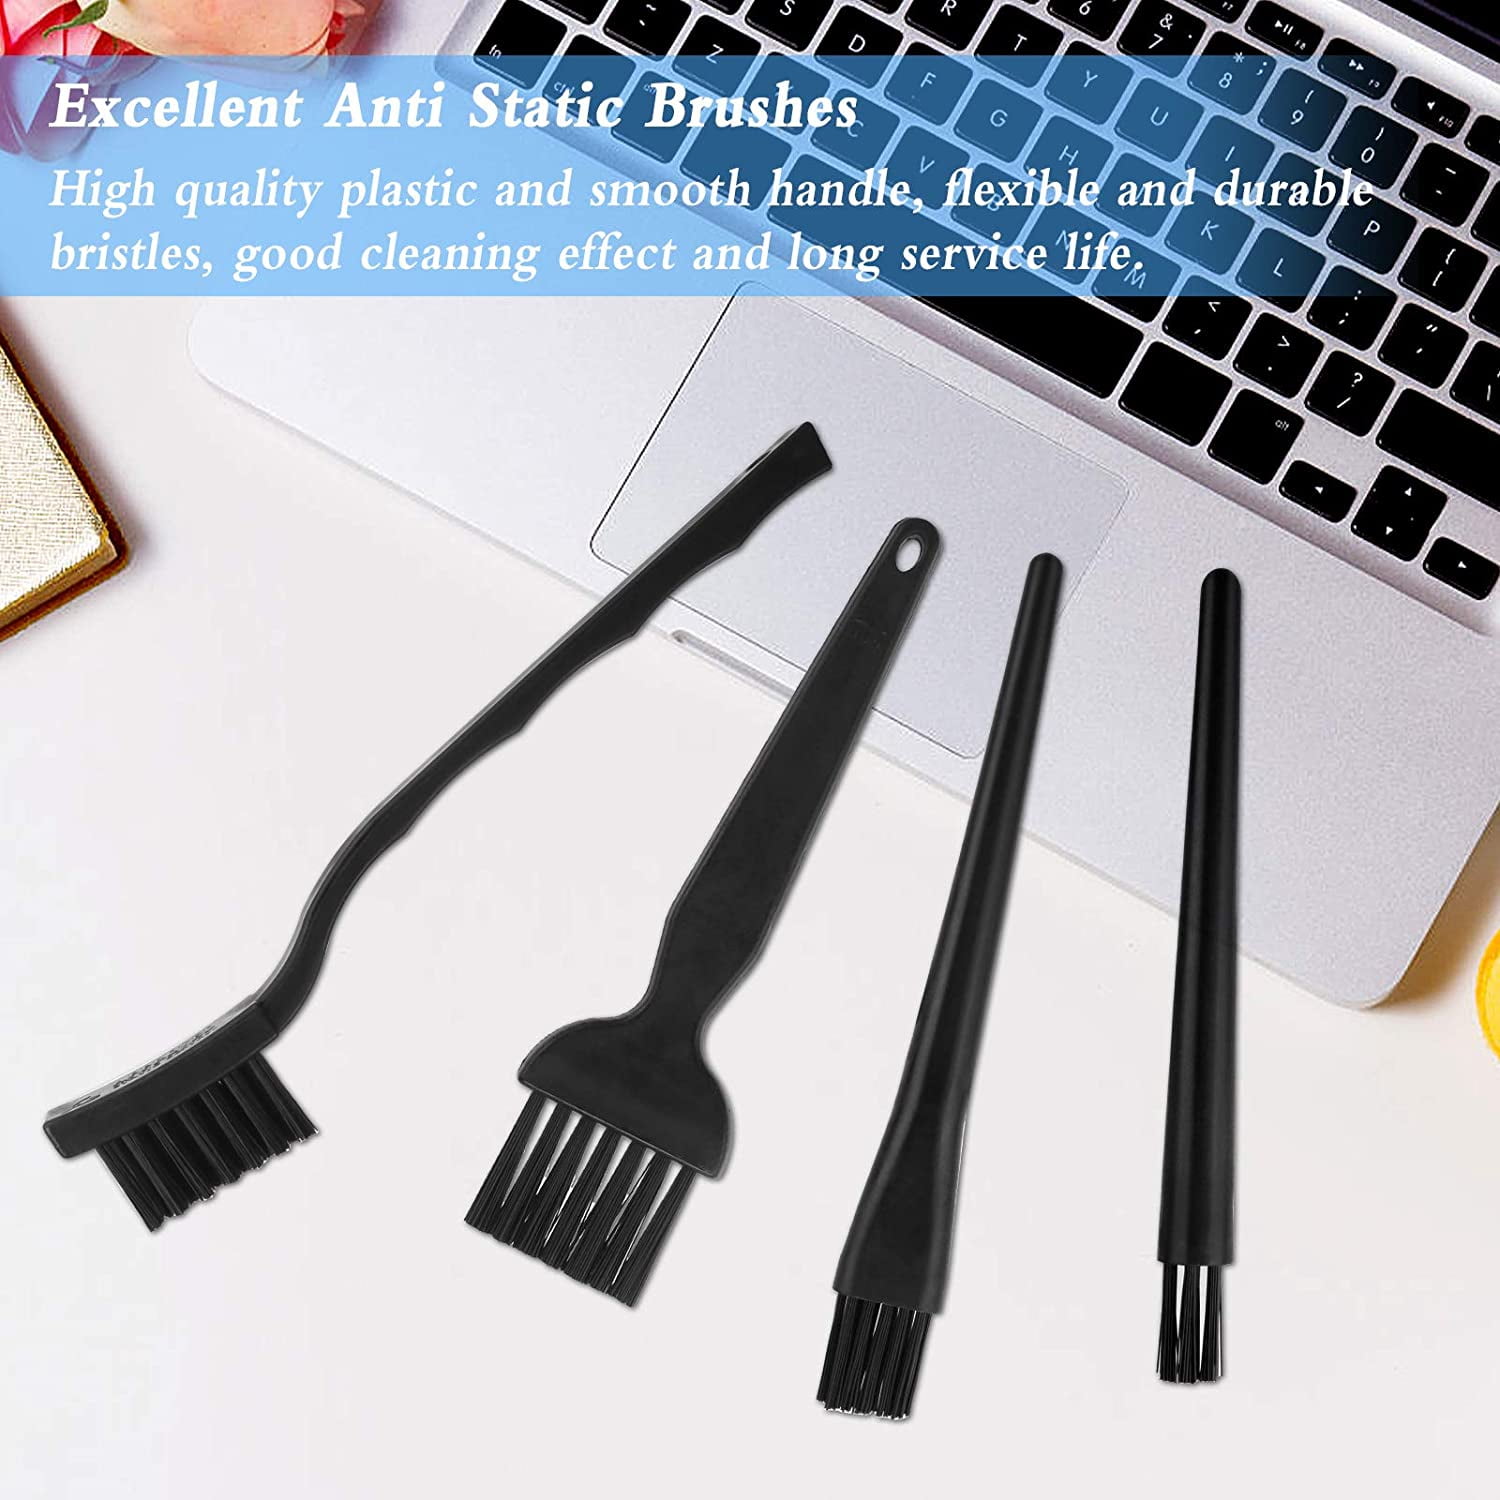 7 In 1 Anti Static Cleaning Brush Set Keyboard Brush Multipurpose Conductive Ground ESD Plastic Handle Nylon Dust Cleaning Brush Kit For Computer Motherboard Camera ESD Tablet Mobiles